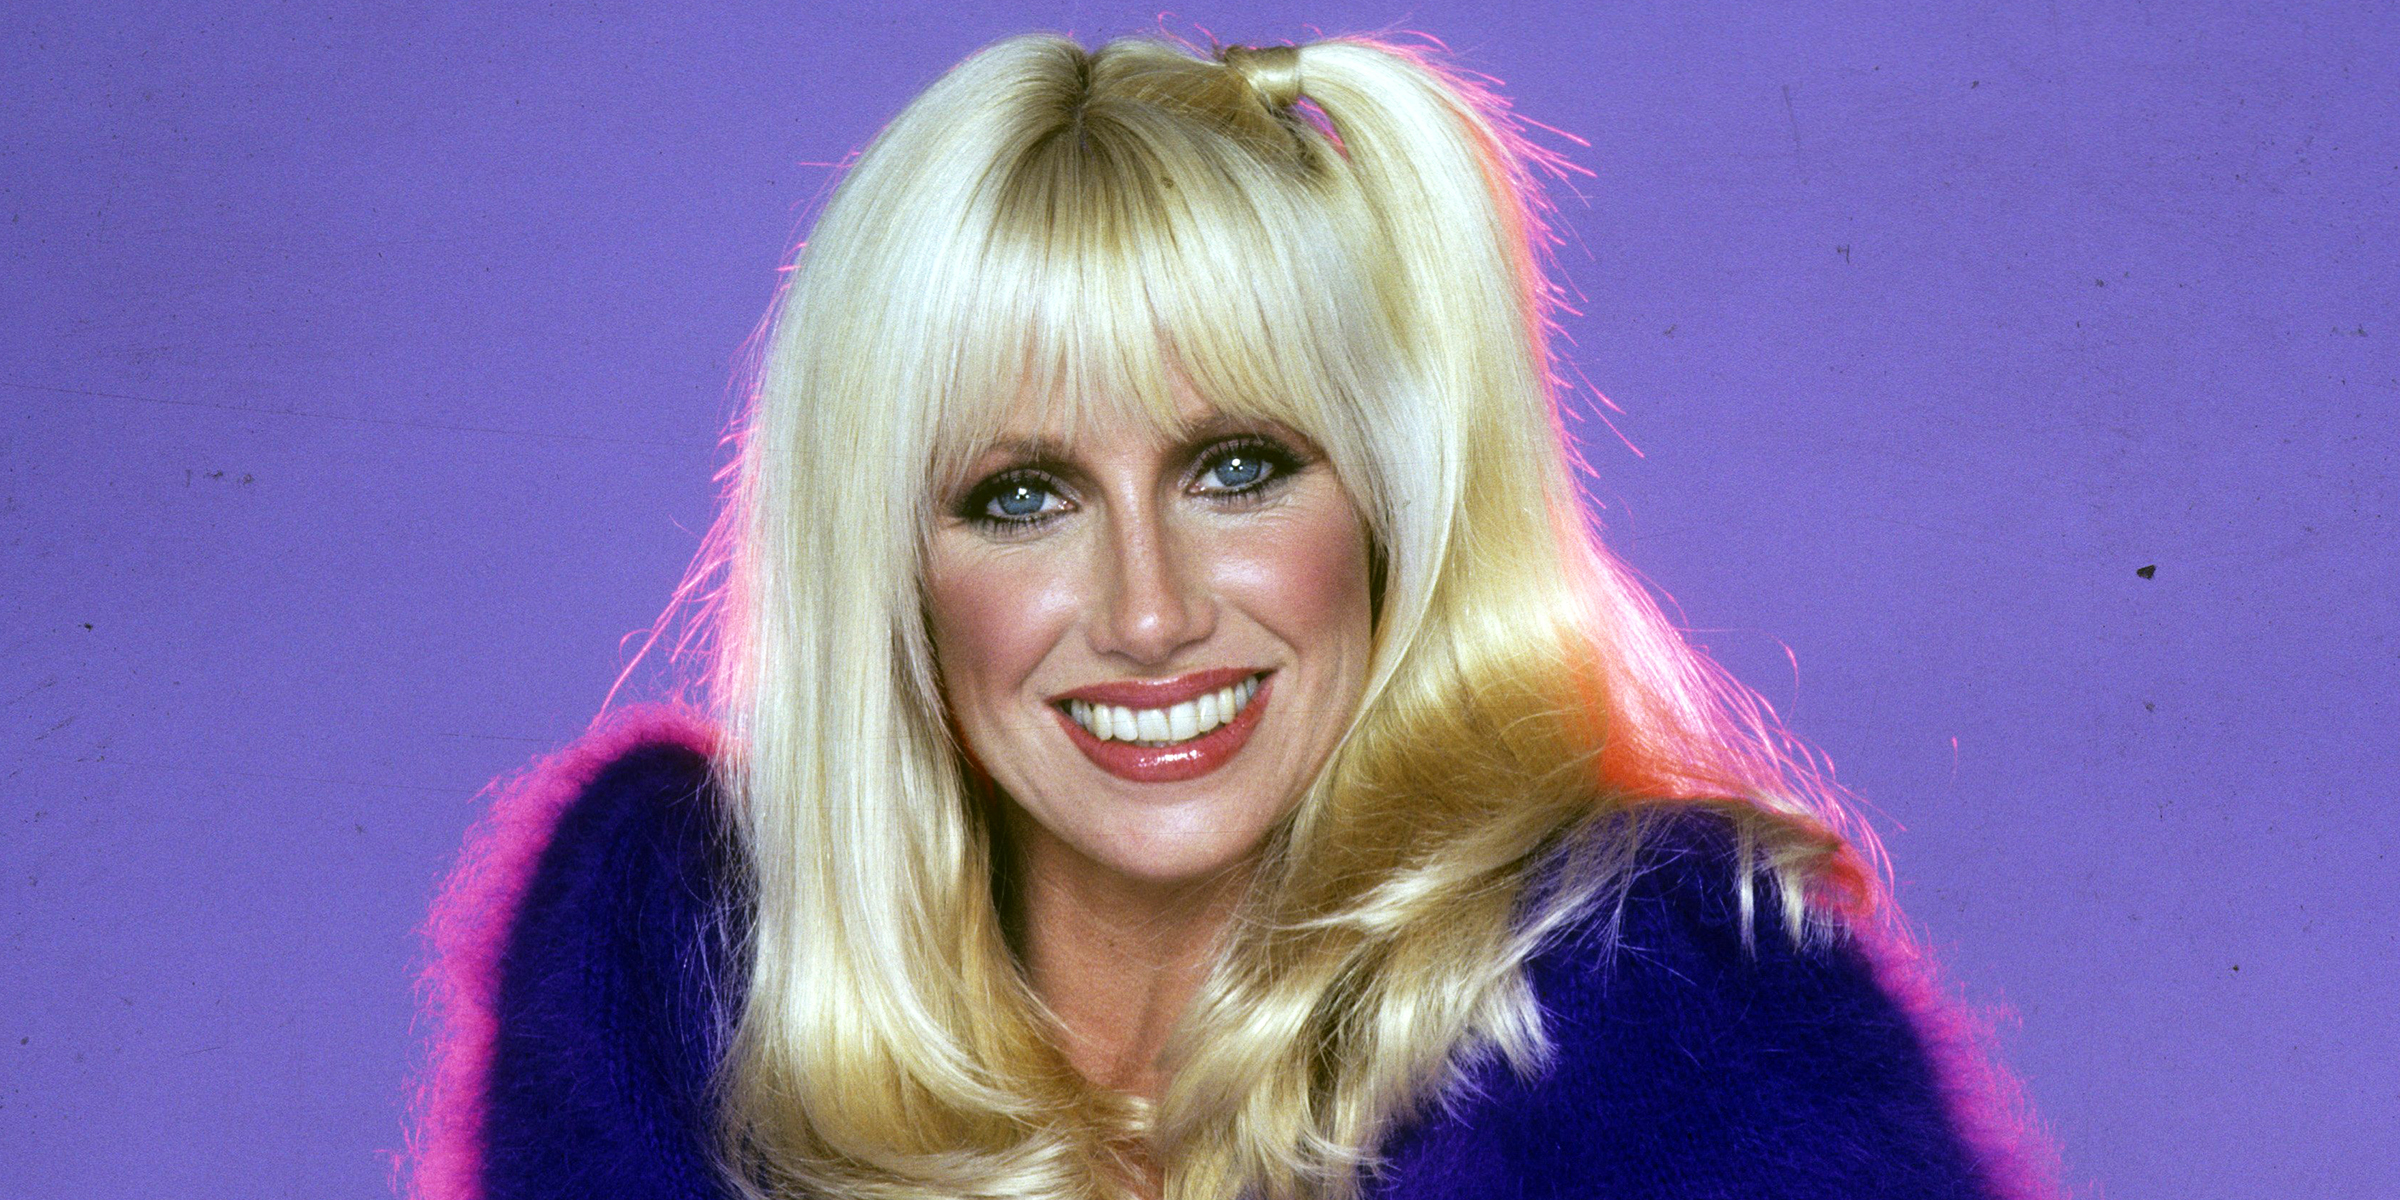 Suzanne Somers | Source: instagram.com/suzannesomers Getty Images